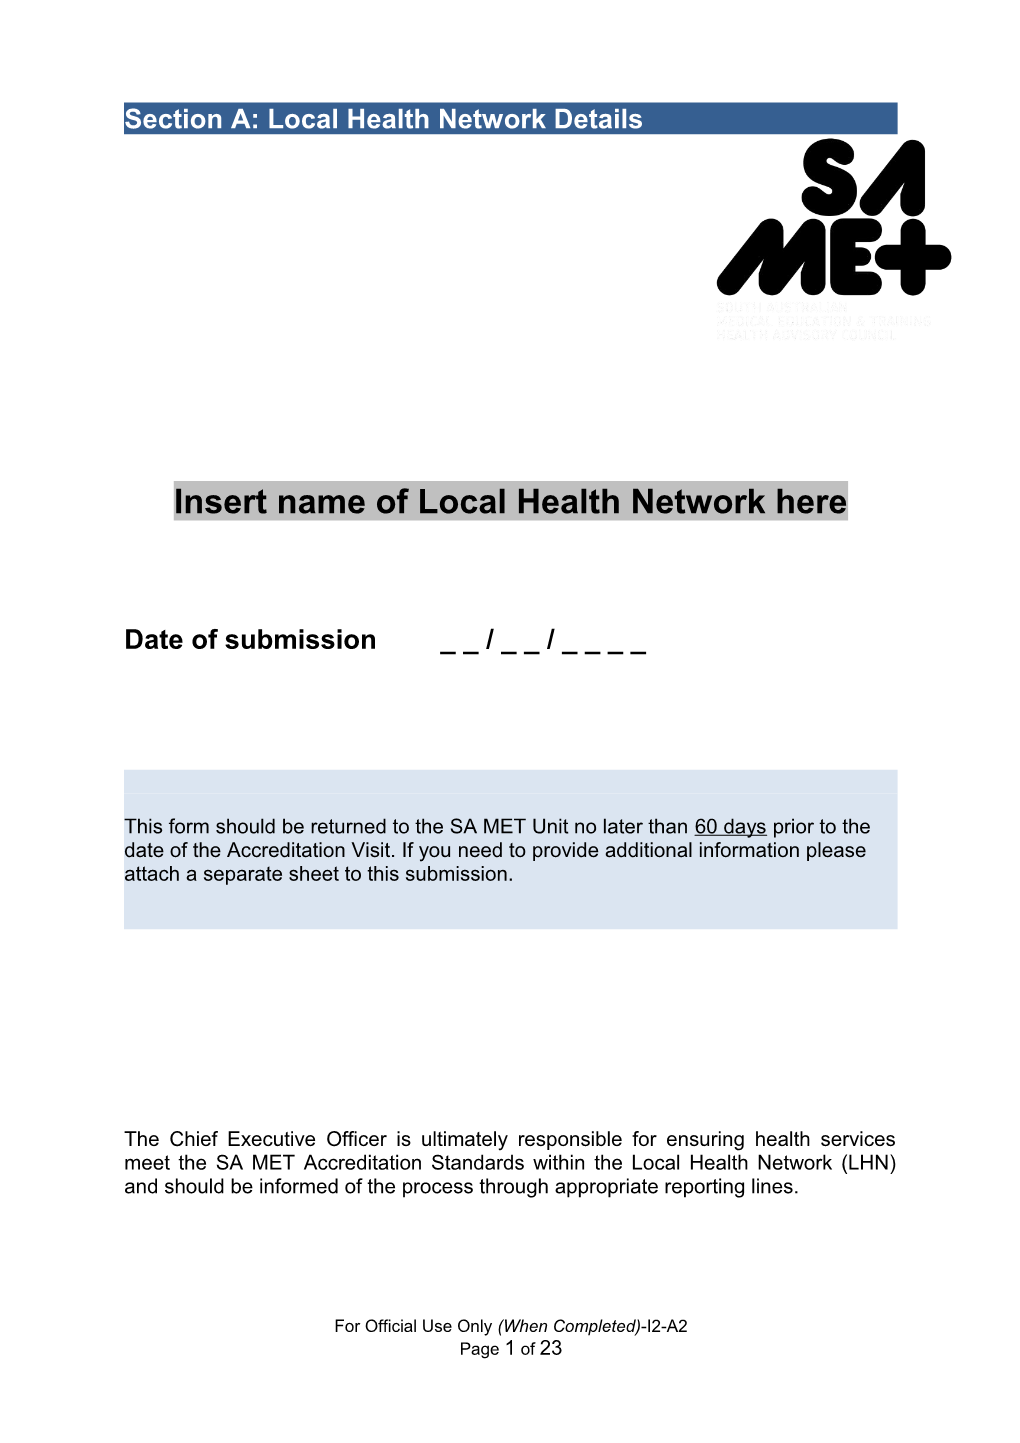 Section A: Local Health Network Details